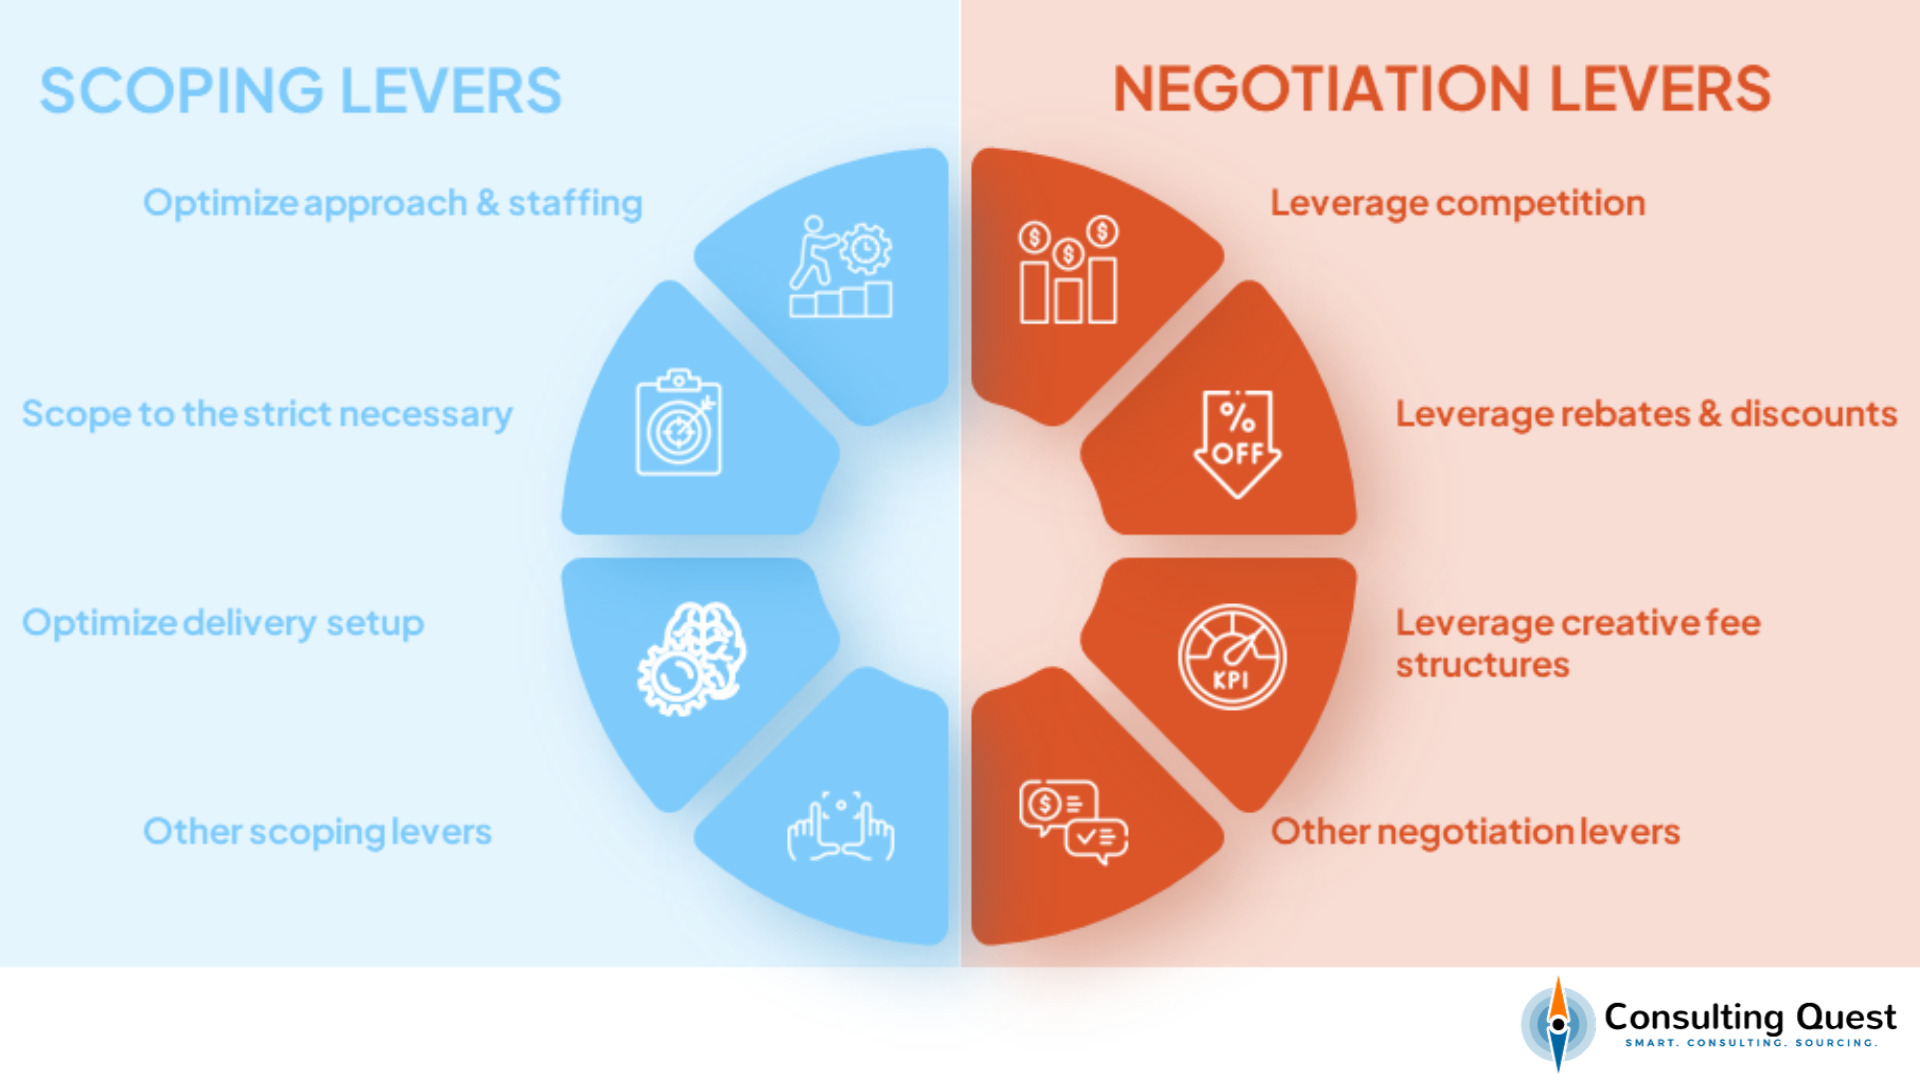 Levers to negotiate consulting agreements